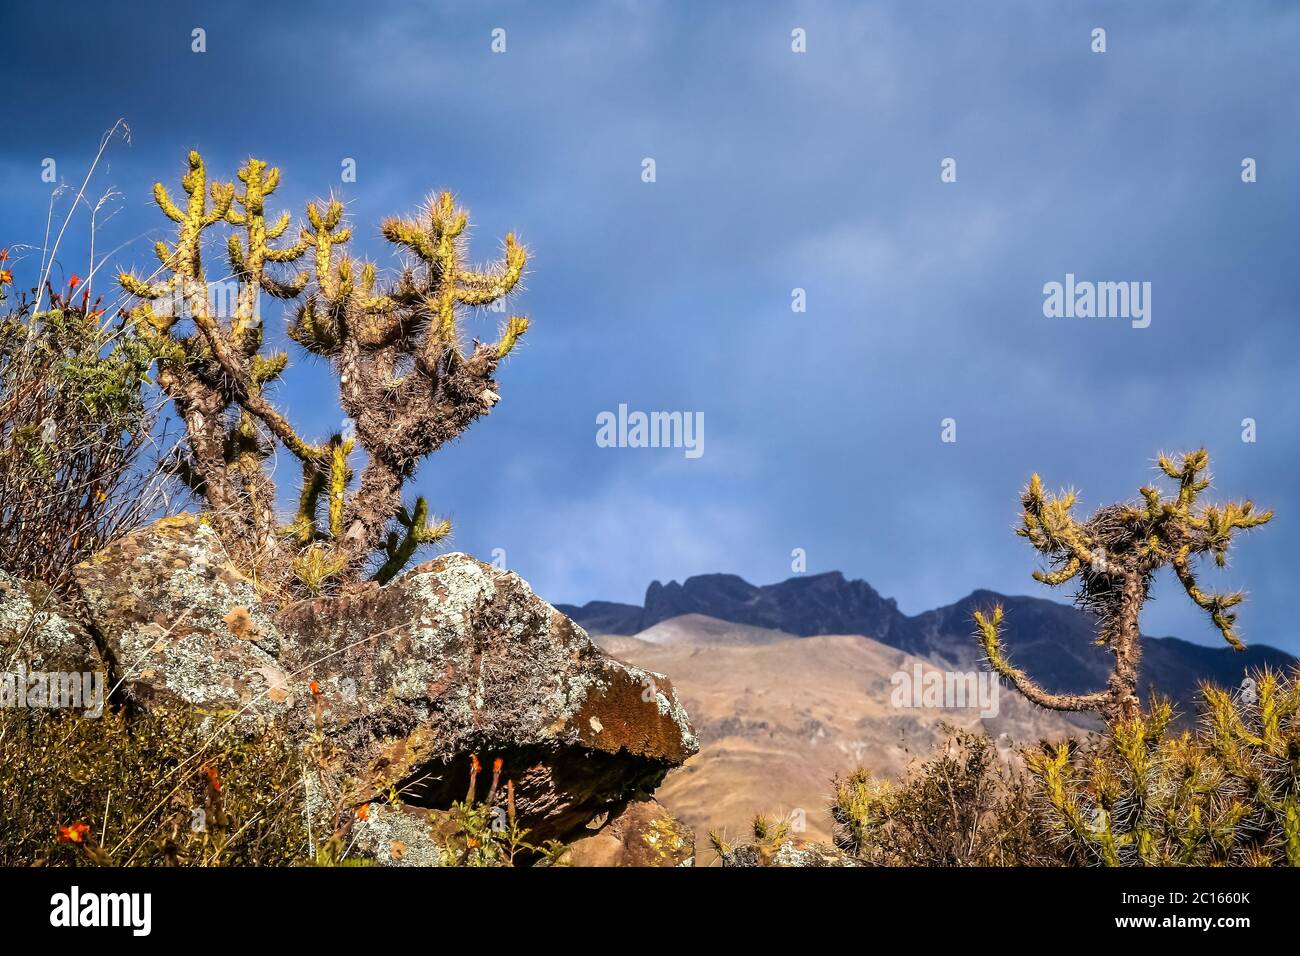 Peruvian cactuses on the rock Stock Photo